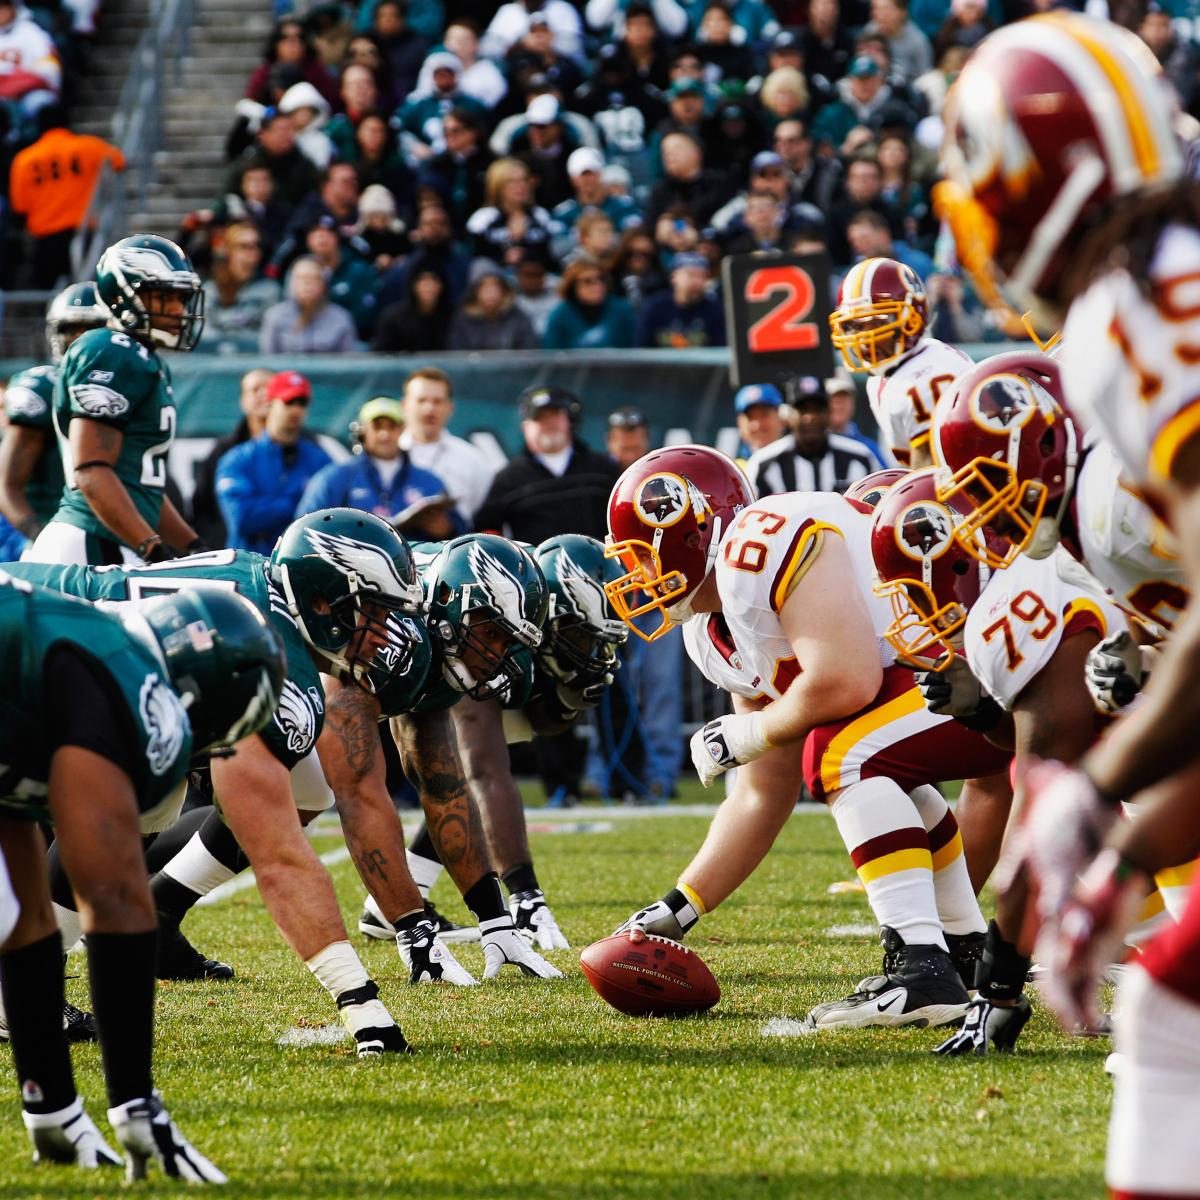 2012 Washington Redskins Schedule: Full Listing of Dates, Time and TV Info | Bleacher Report